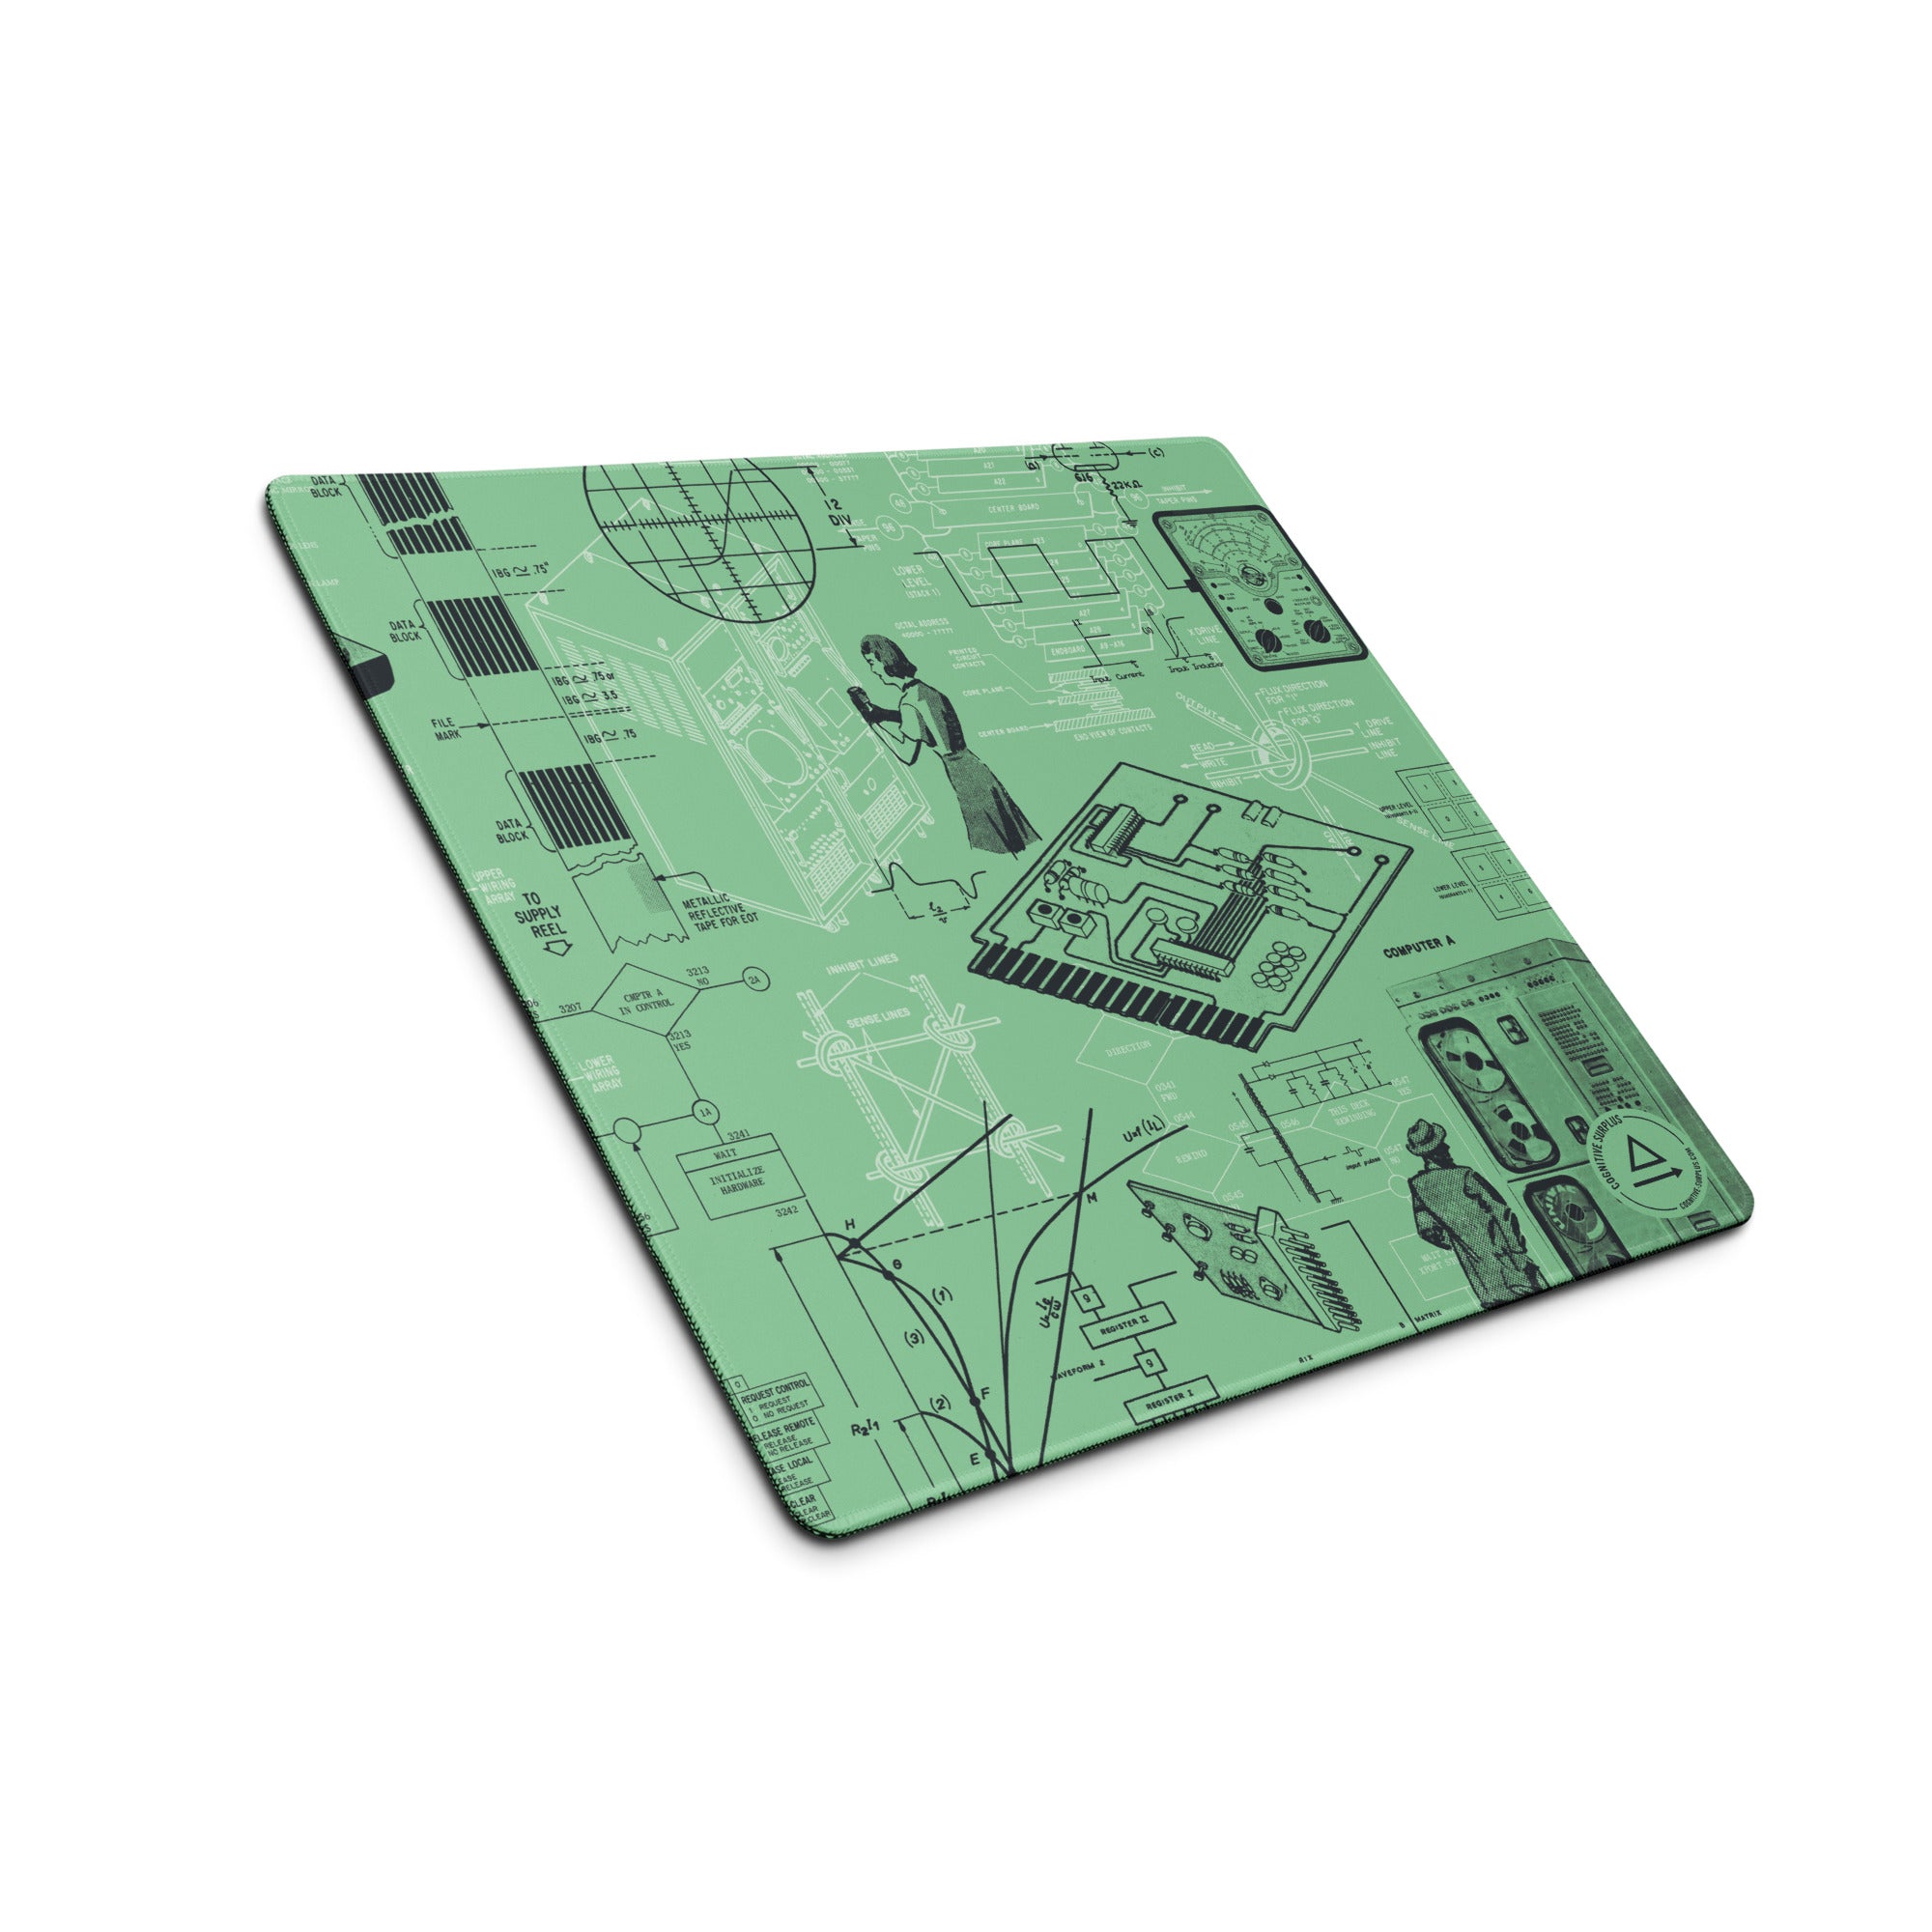 gaming-mouse-pad-white-18x16-front-6595e7689b4be.jpg